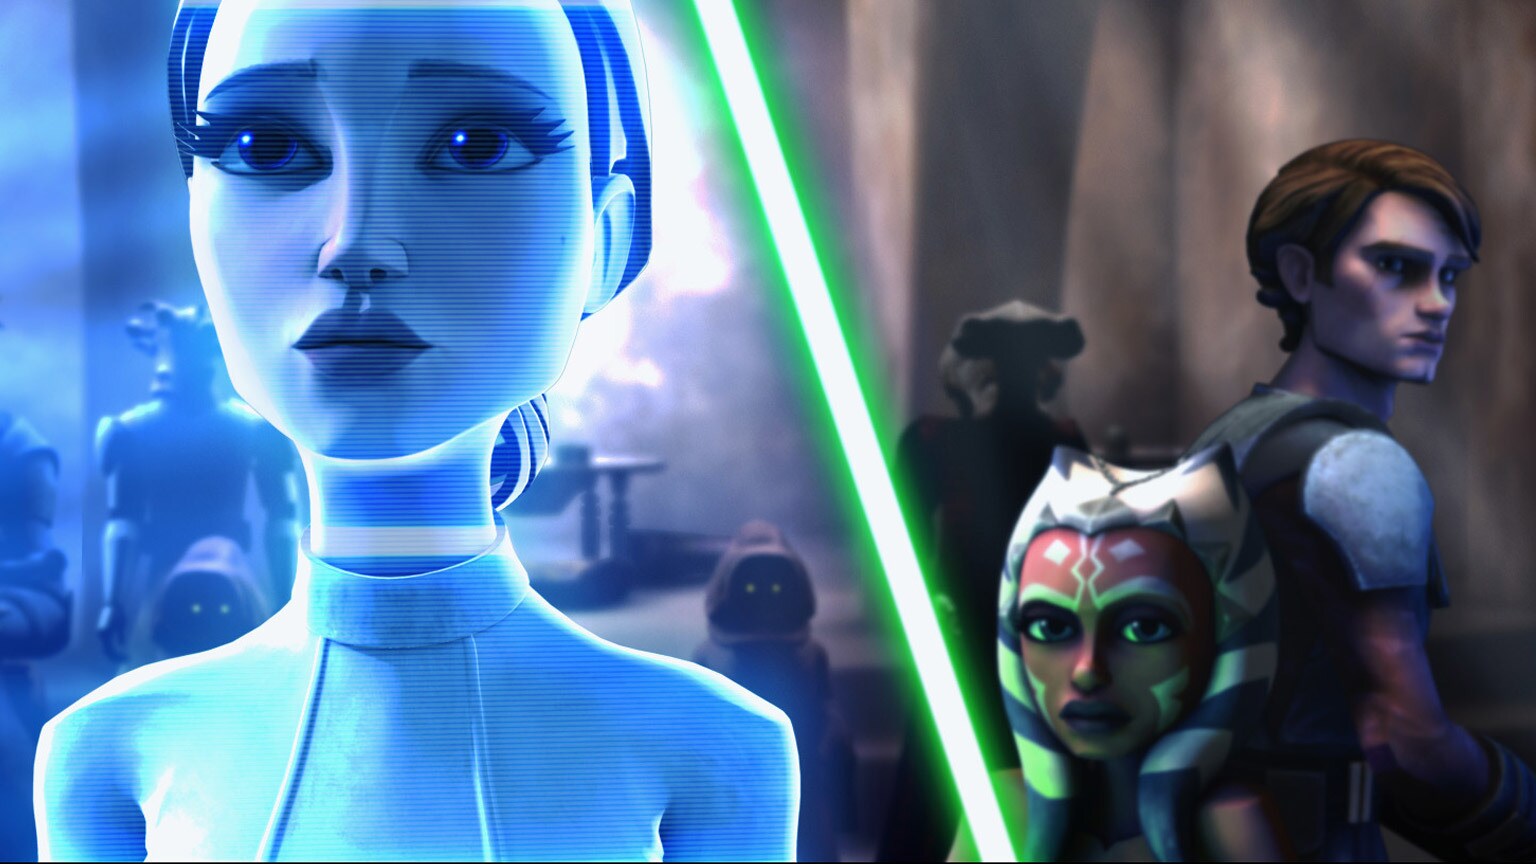 The Clone Wars Rewatch: A Sith Plot Unravels in the Theatrical Release (Part 3 of 3)